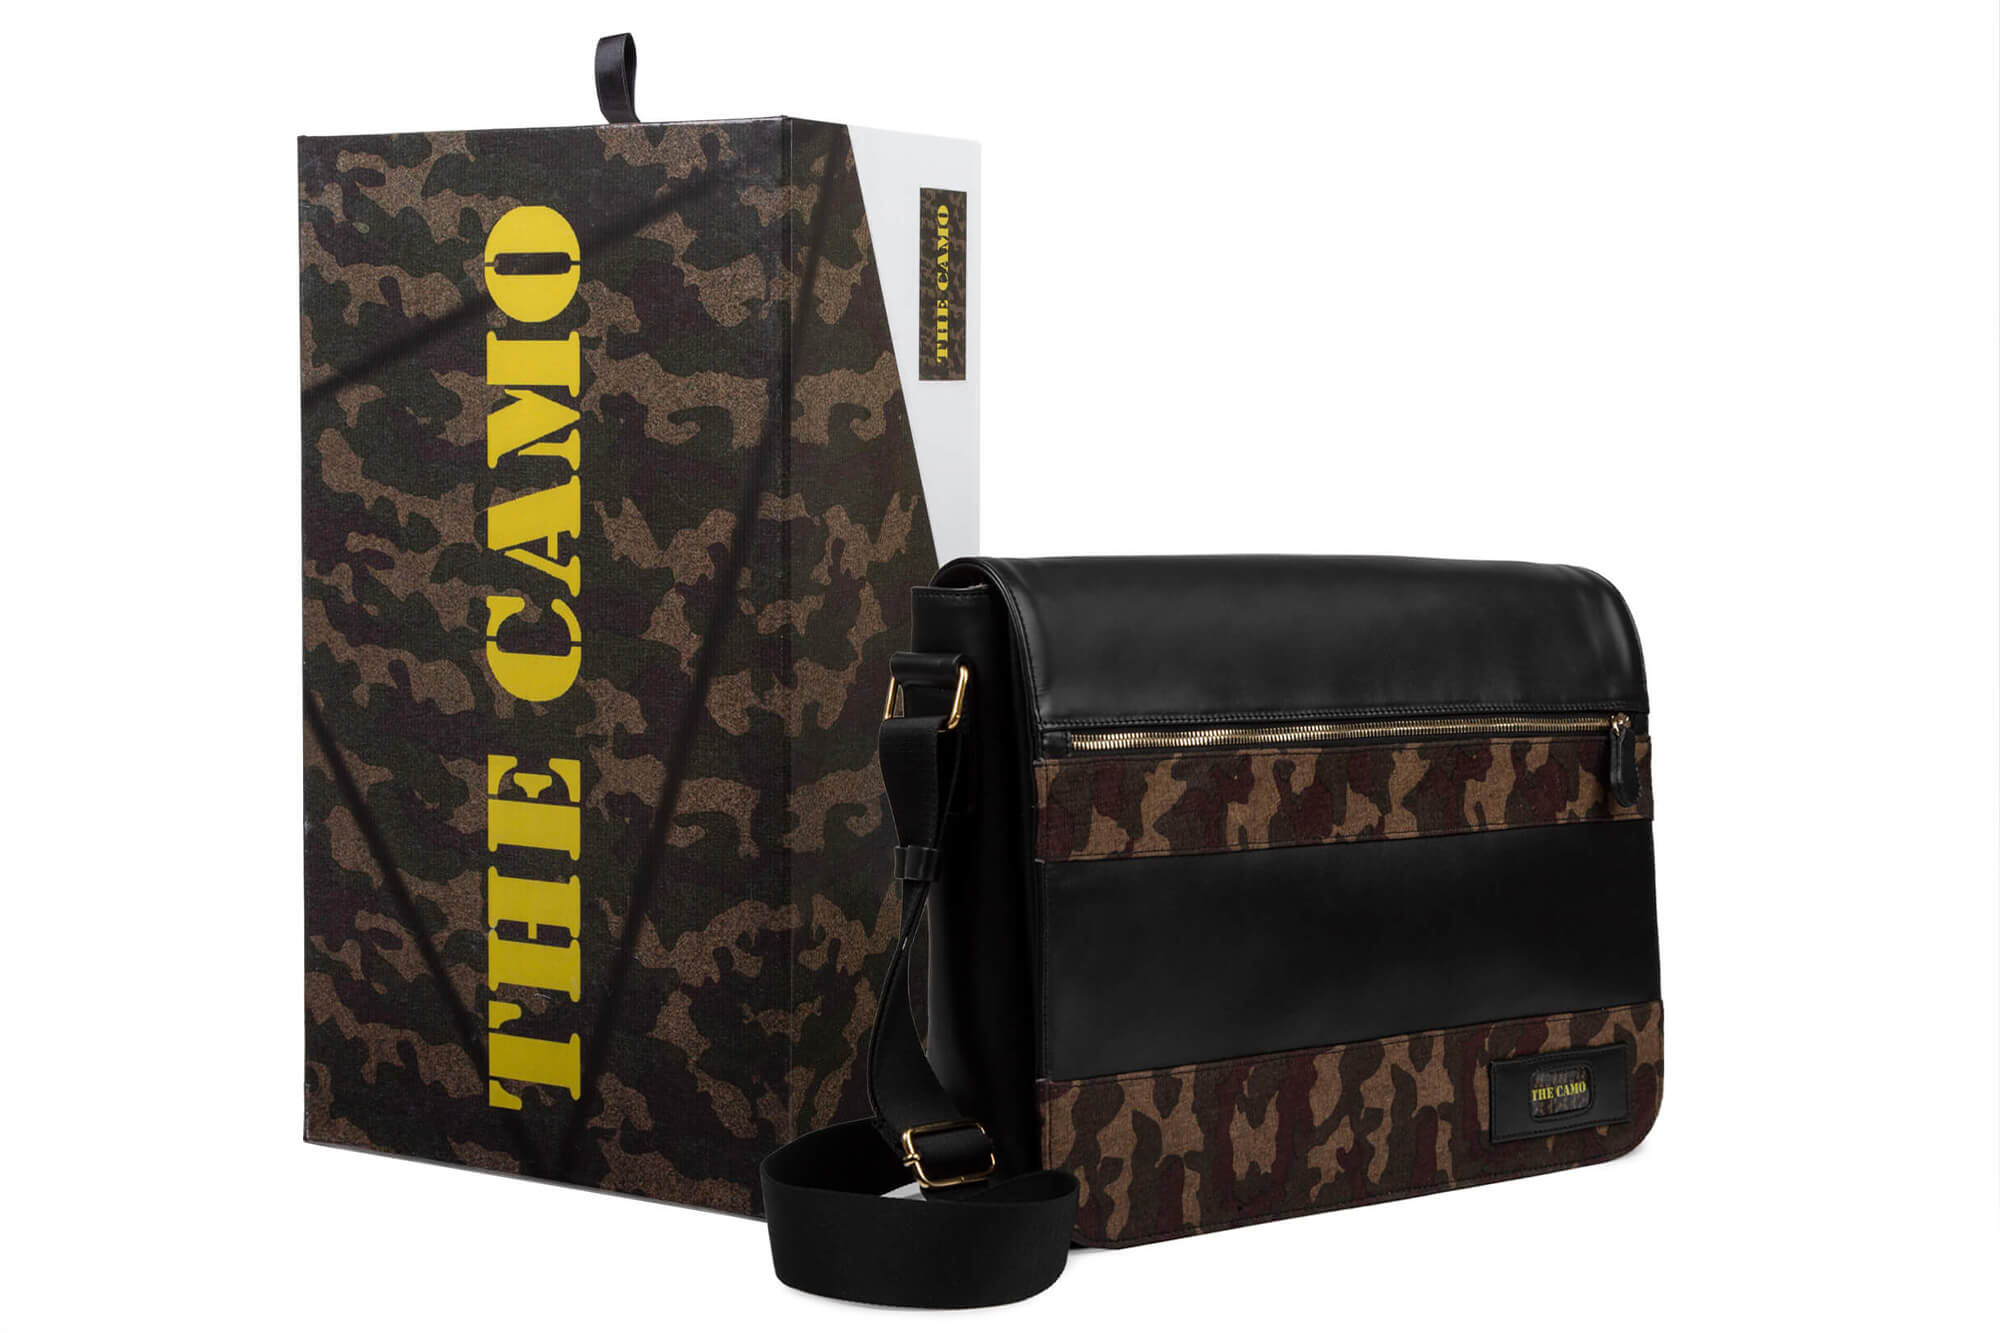 THE CAMO customized made in Italy products by Harry Mutton